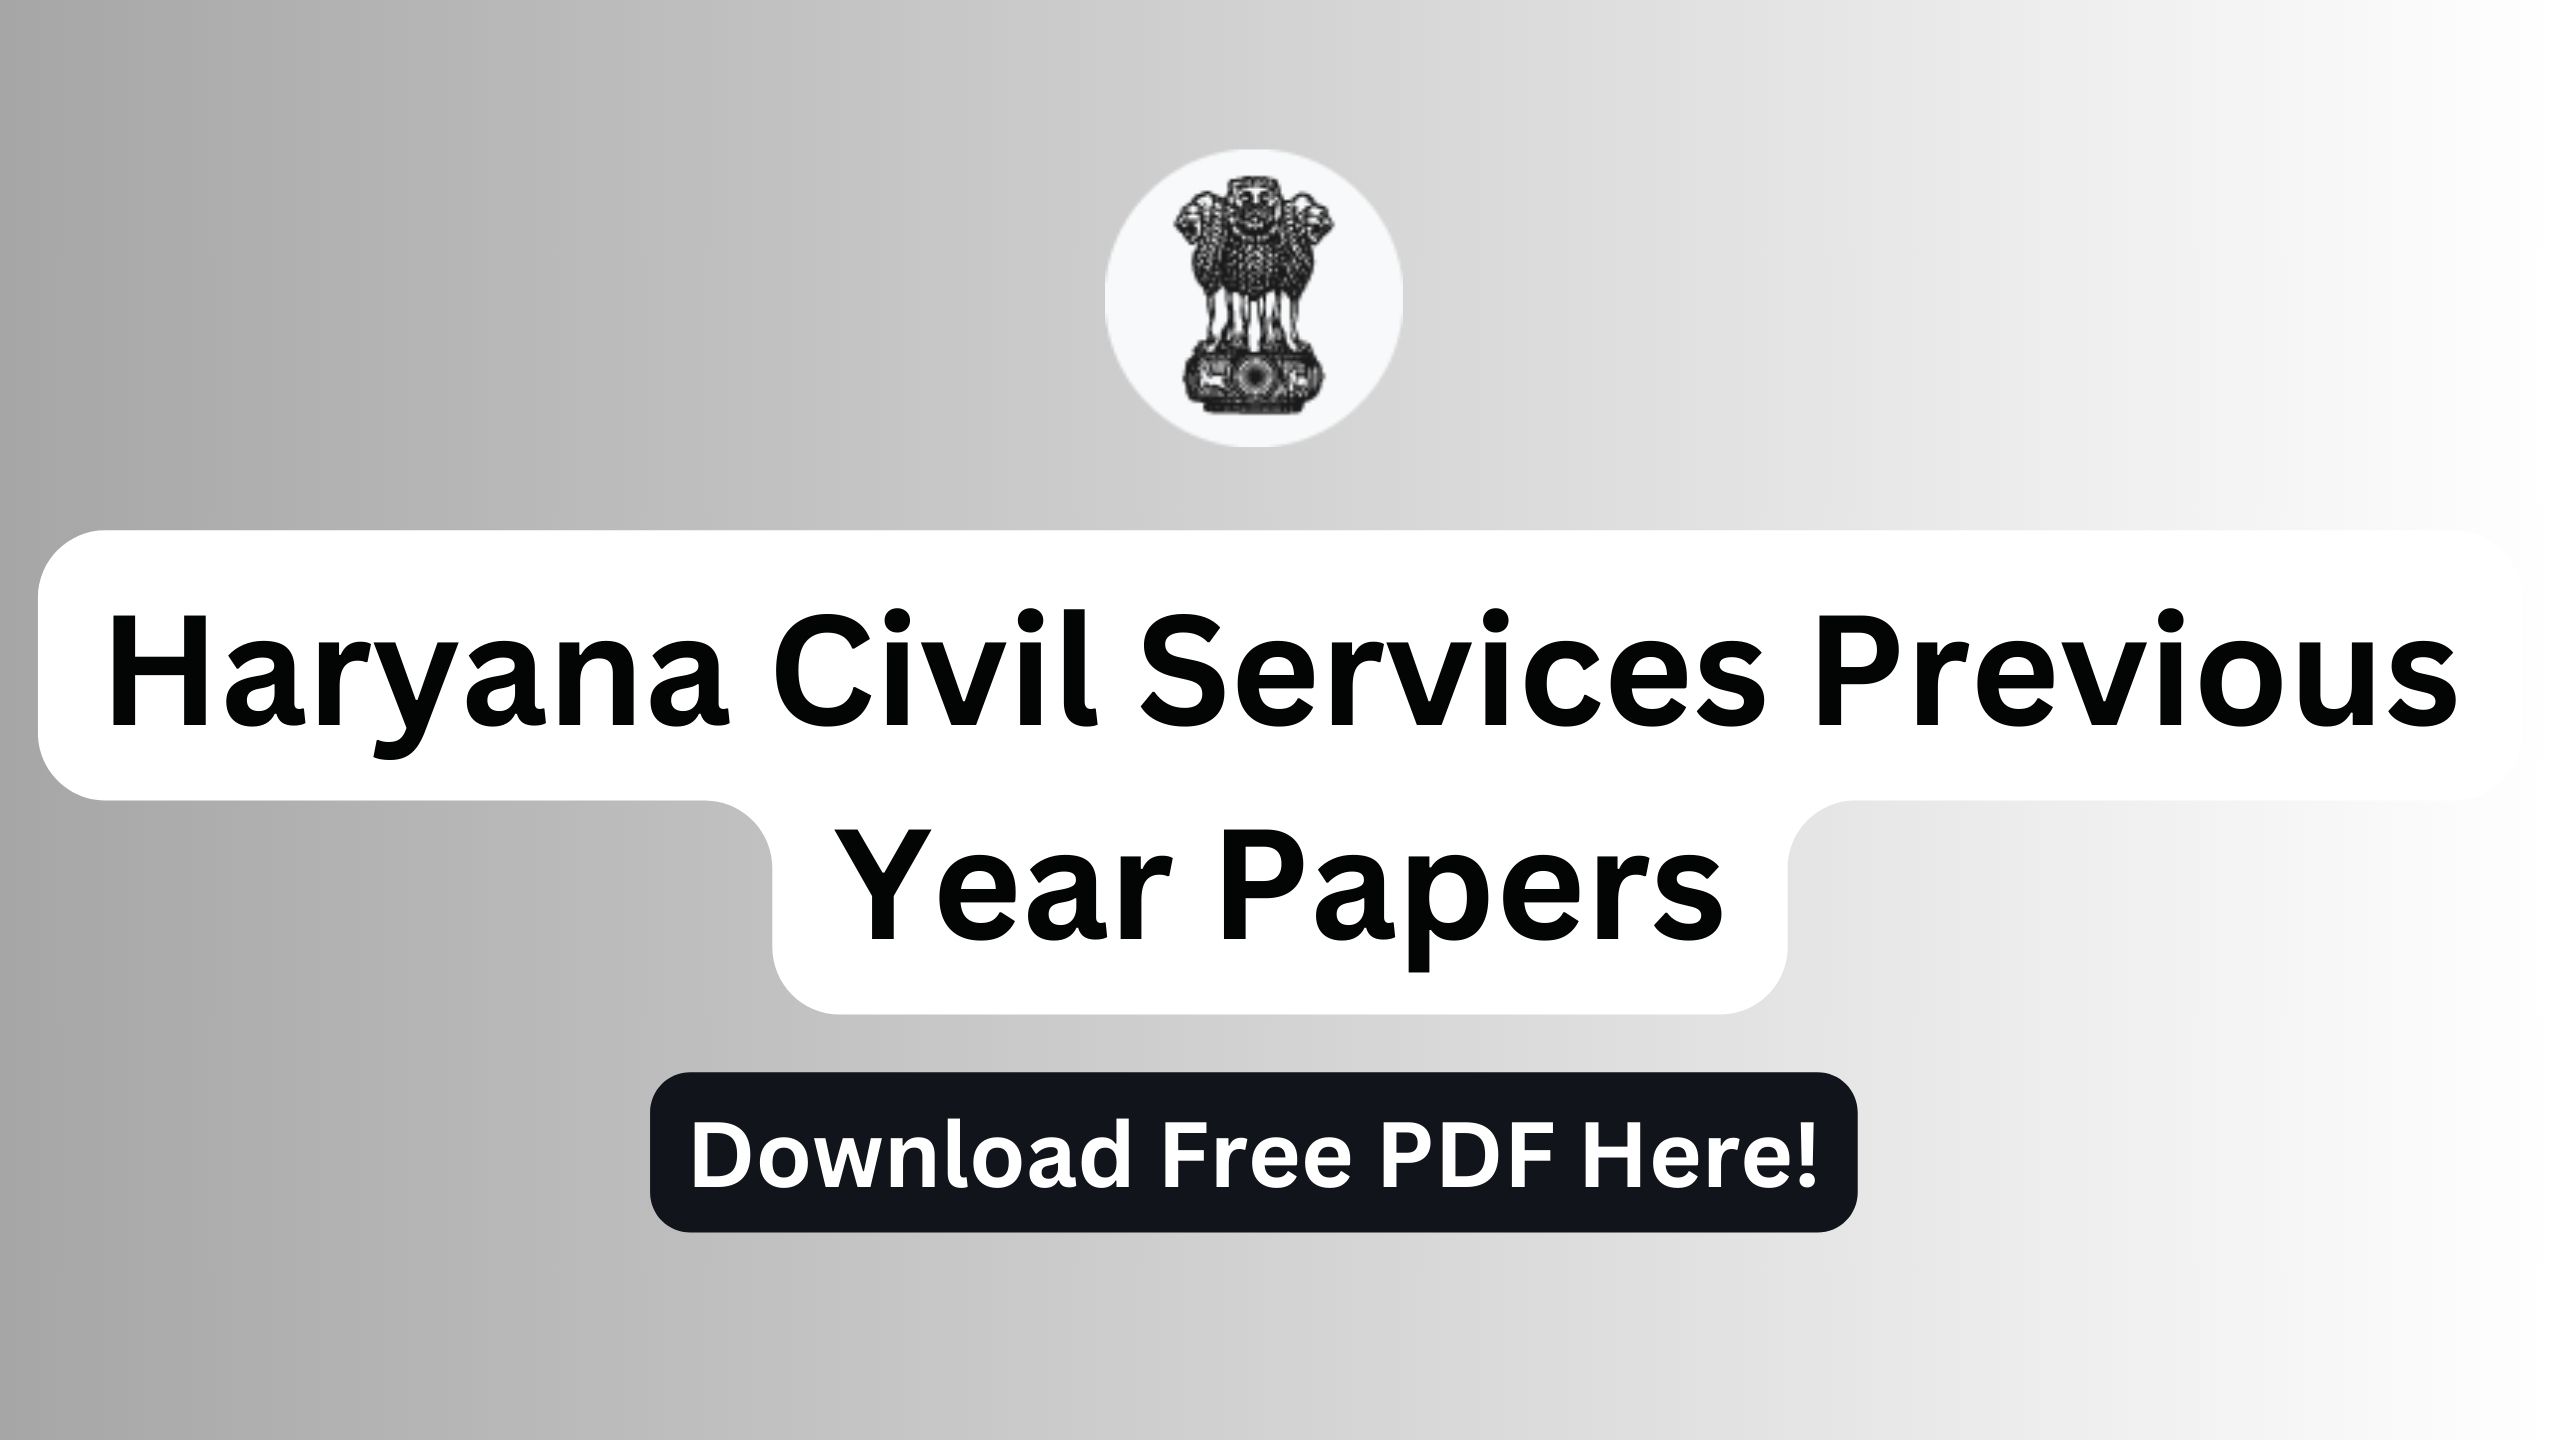 Haryana Civil Services Previous Year Papers